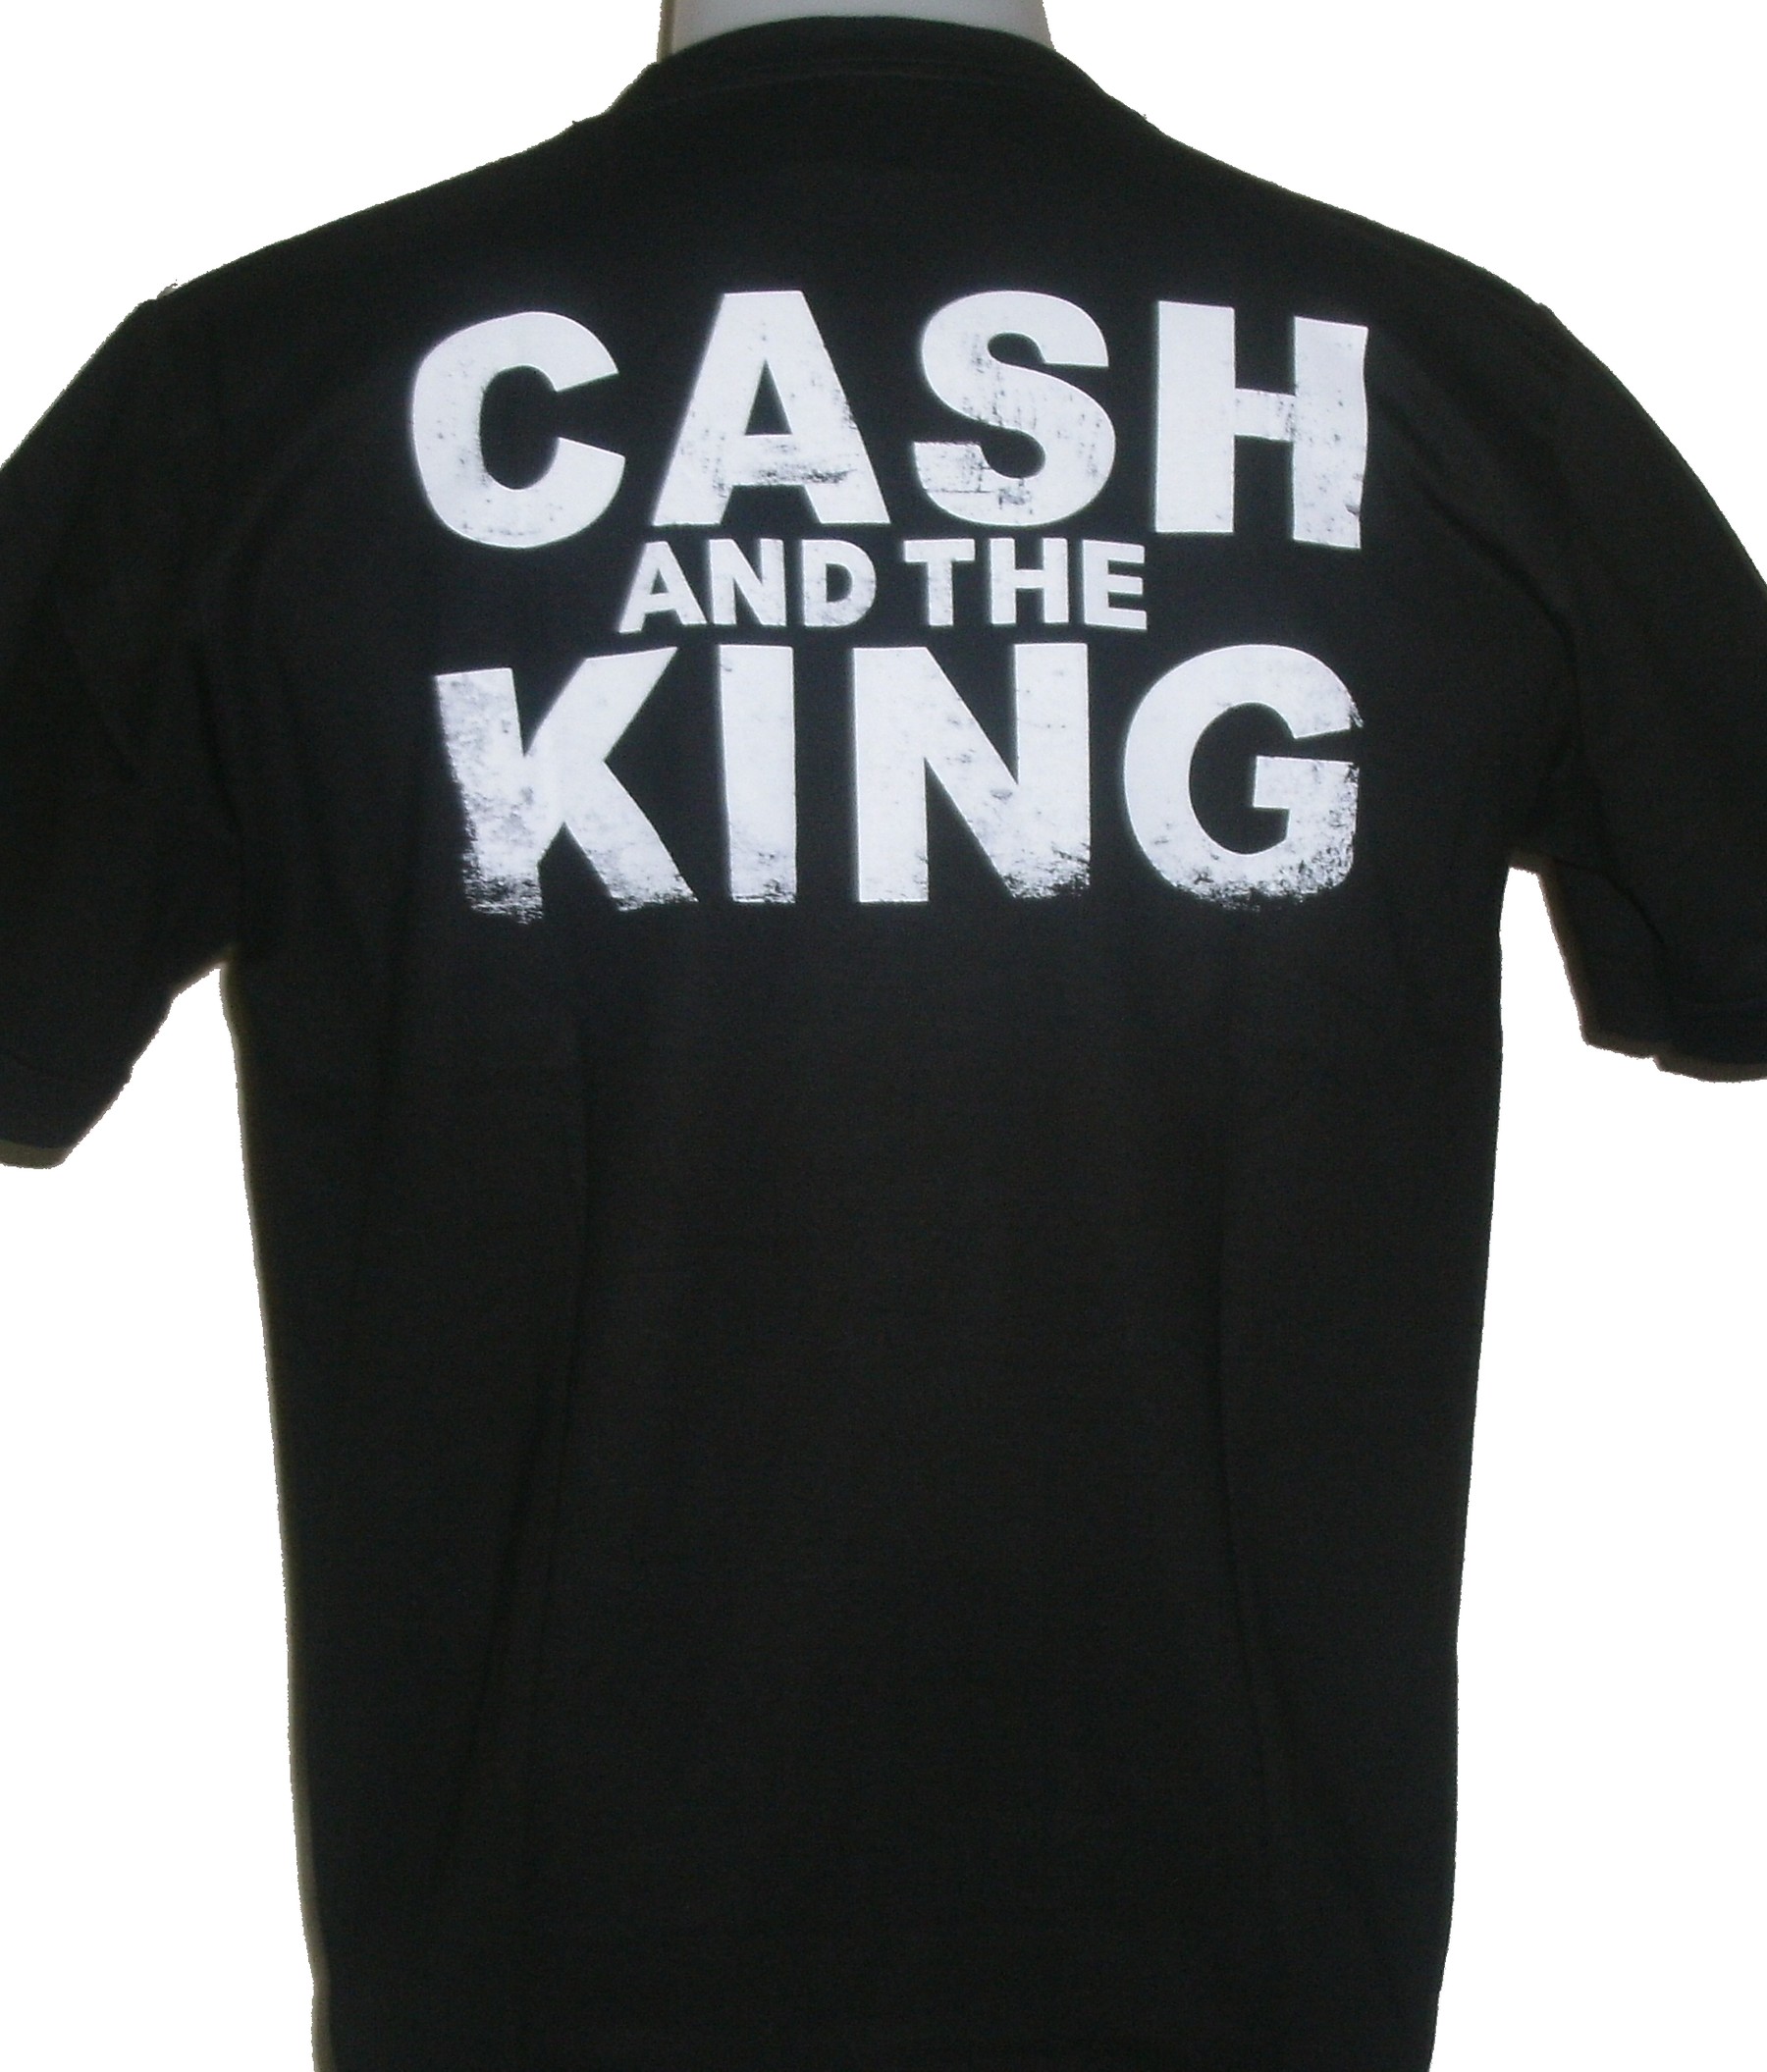 Johnny Cash t-shirt Cash and the King size L